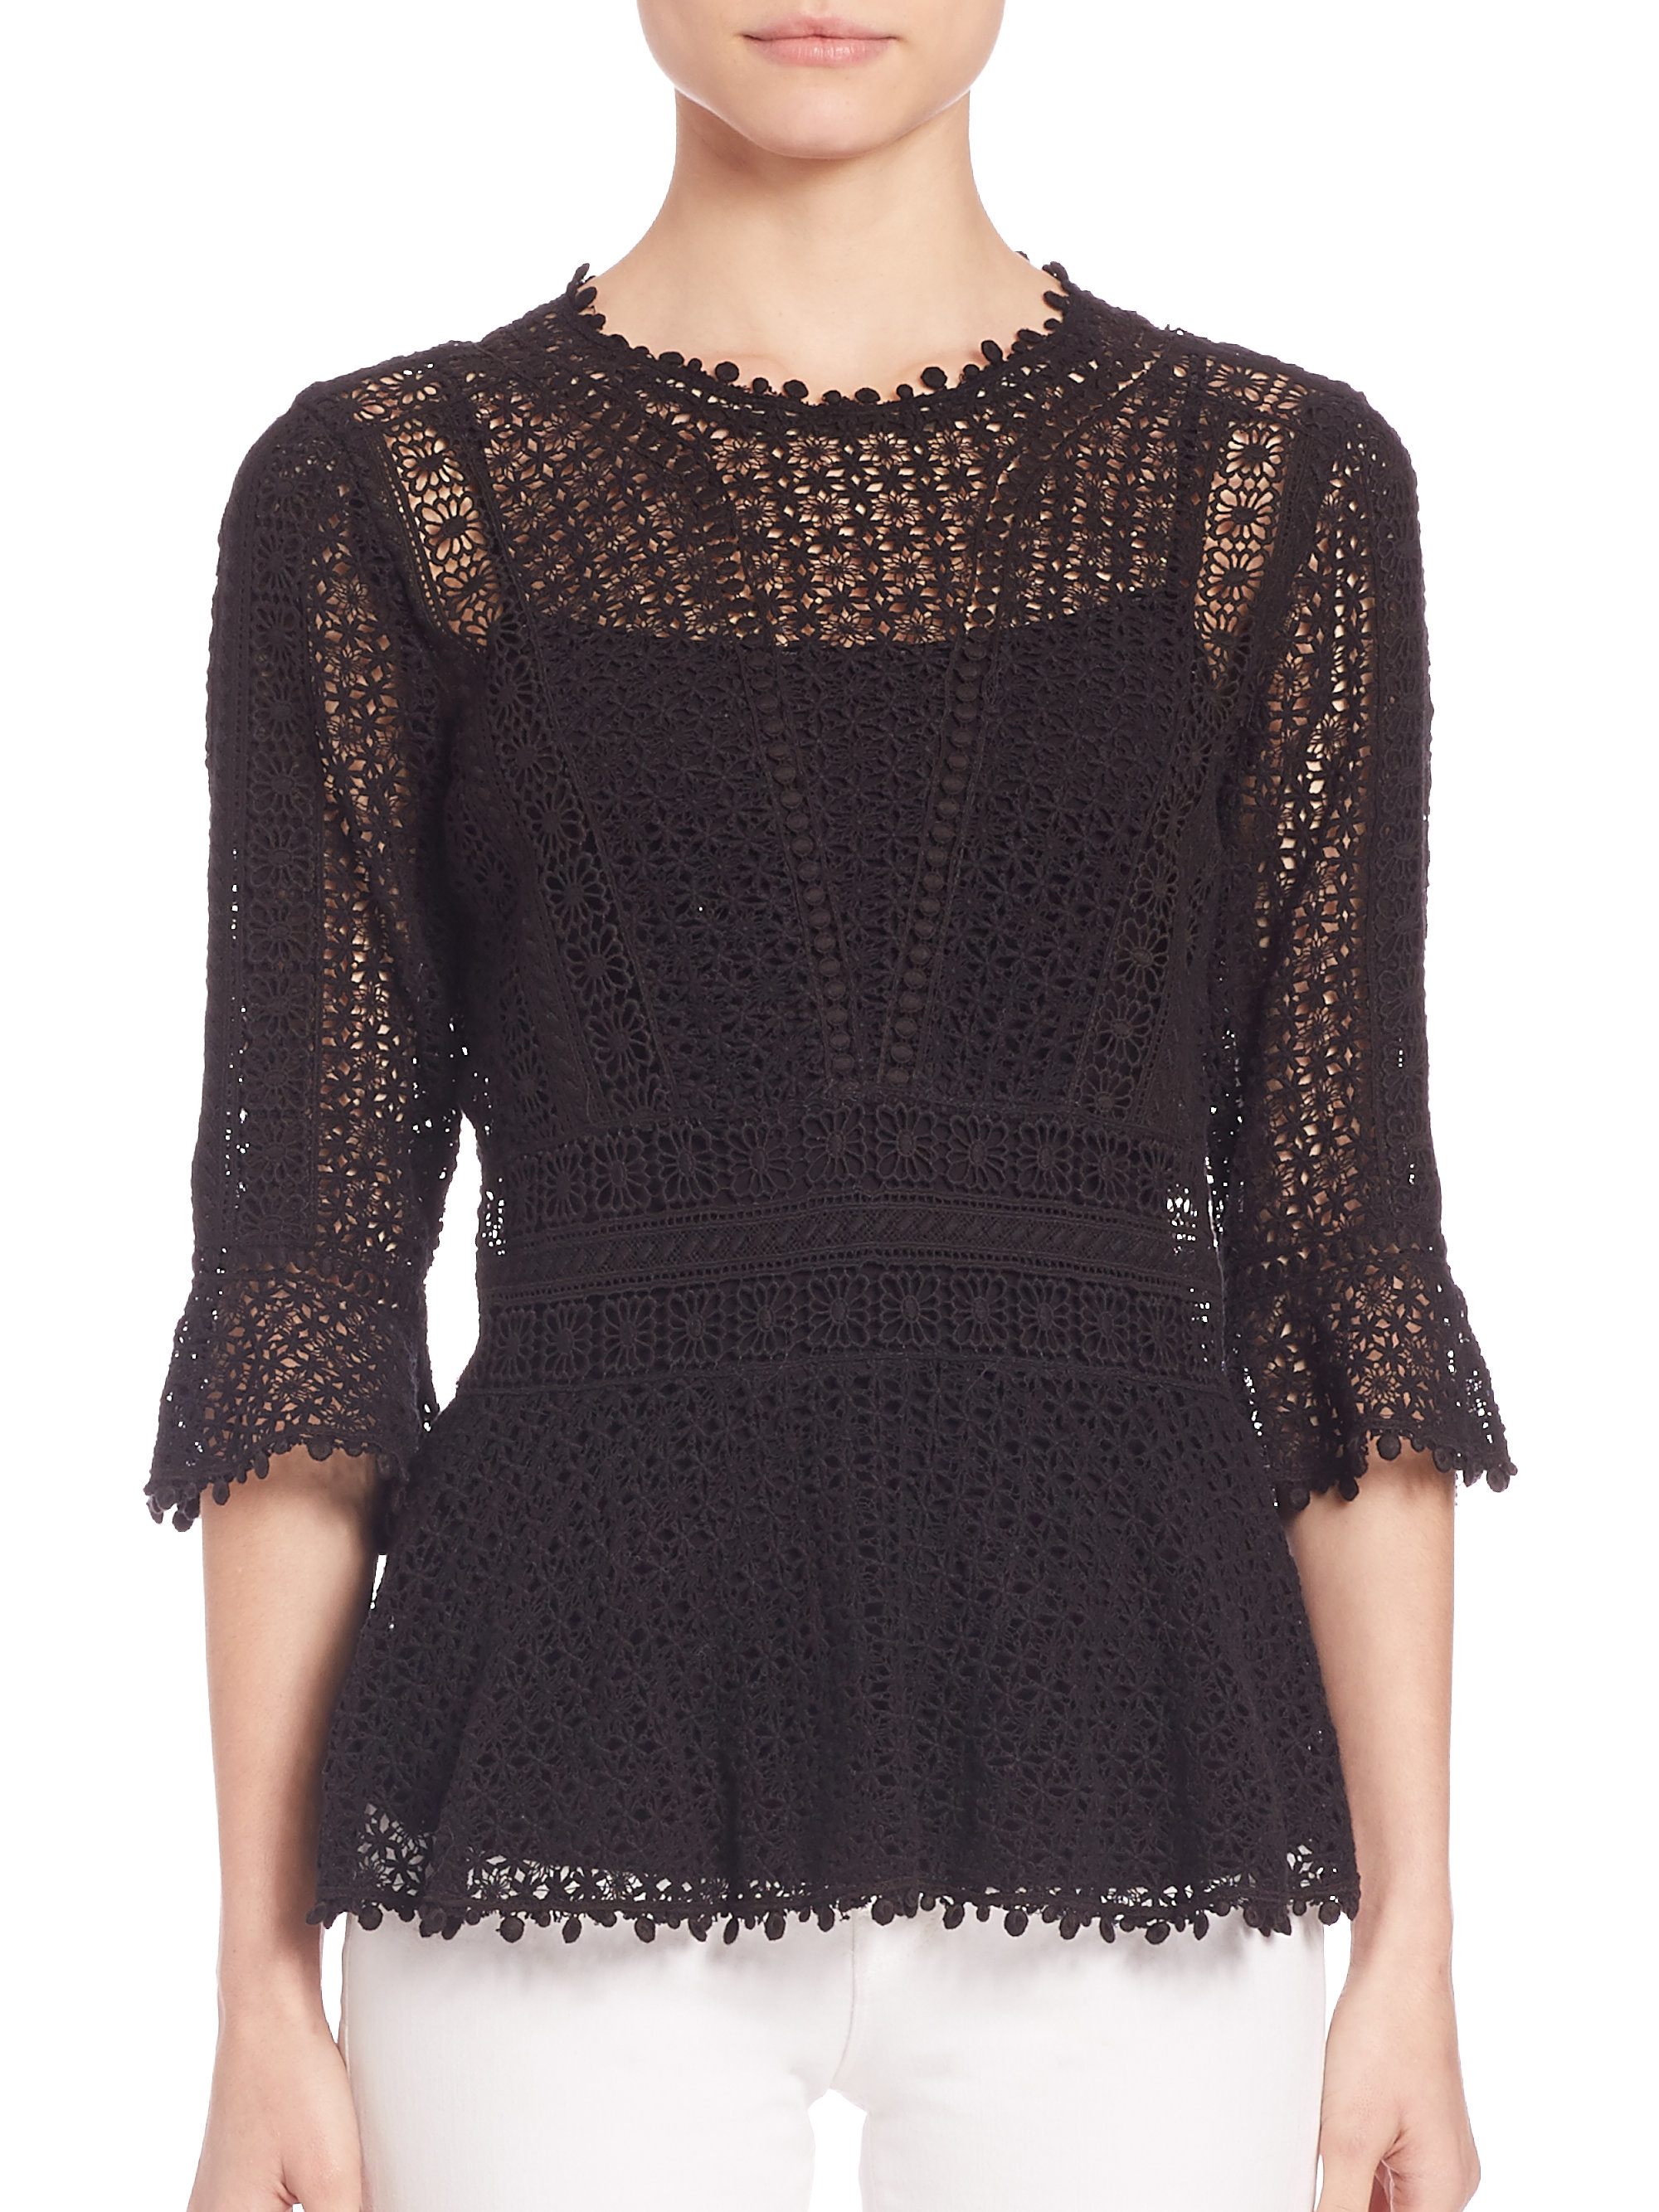 Rebecca Taylor Guipure Lace Top in Black - Lyst